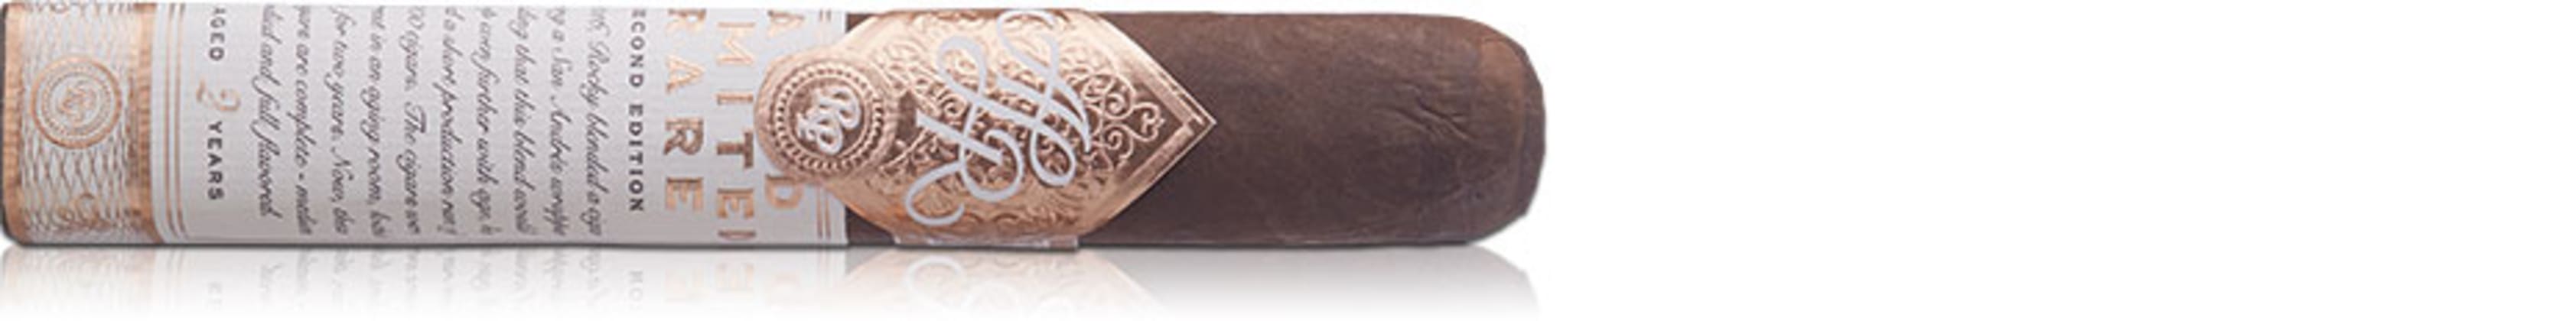 Buy Rocky Patel A.L.R. Second Edition Toro Cigars at 